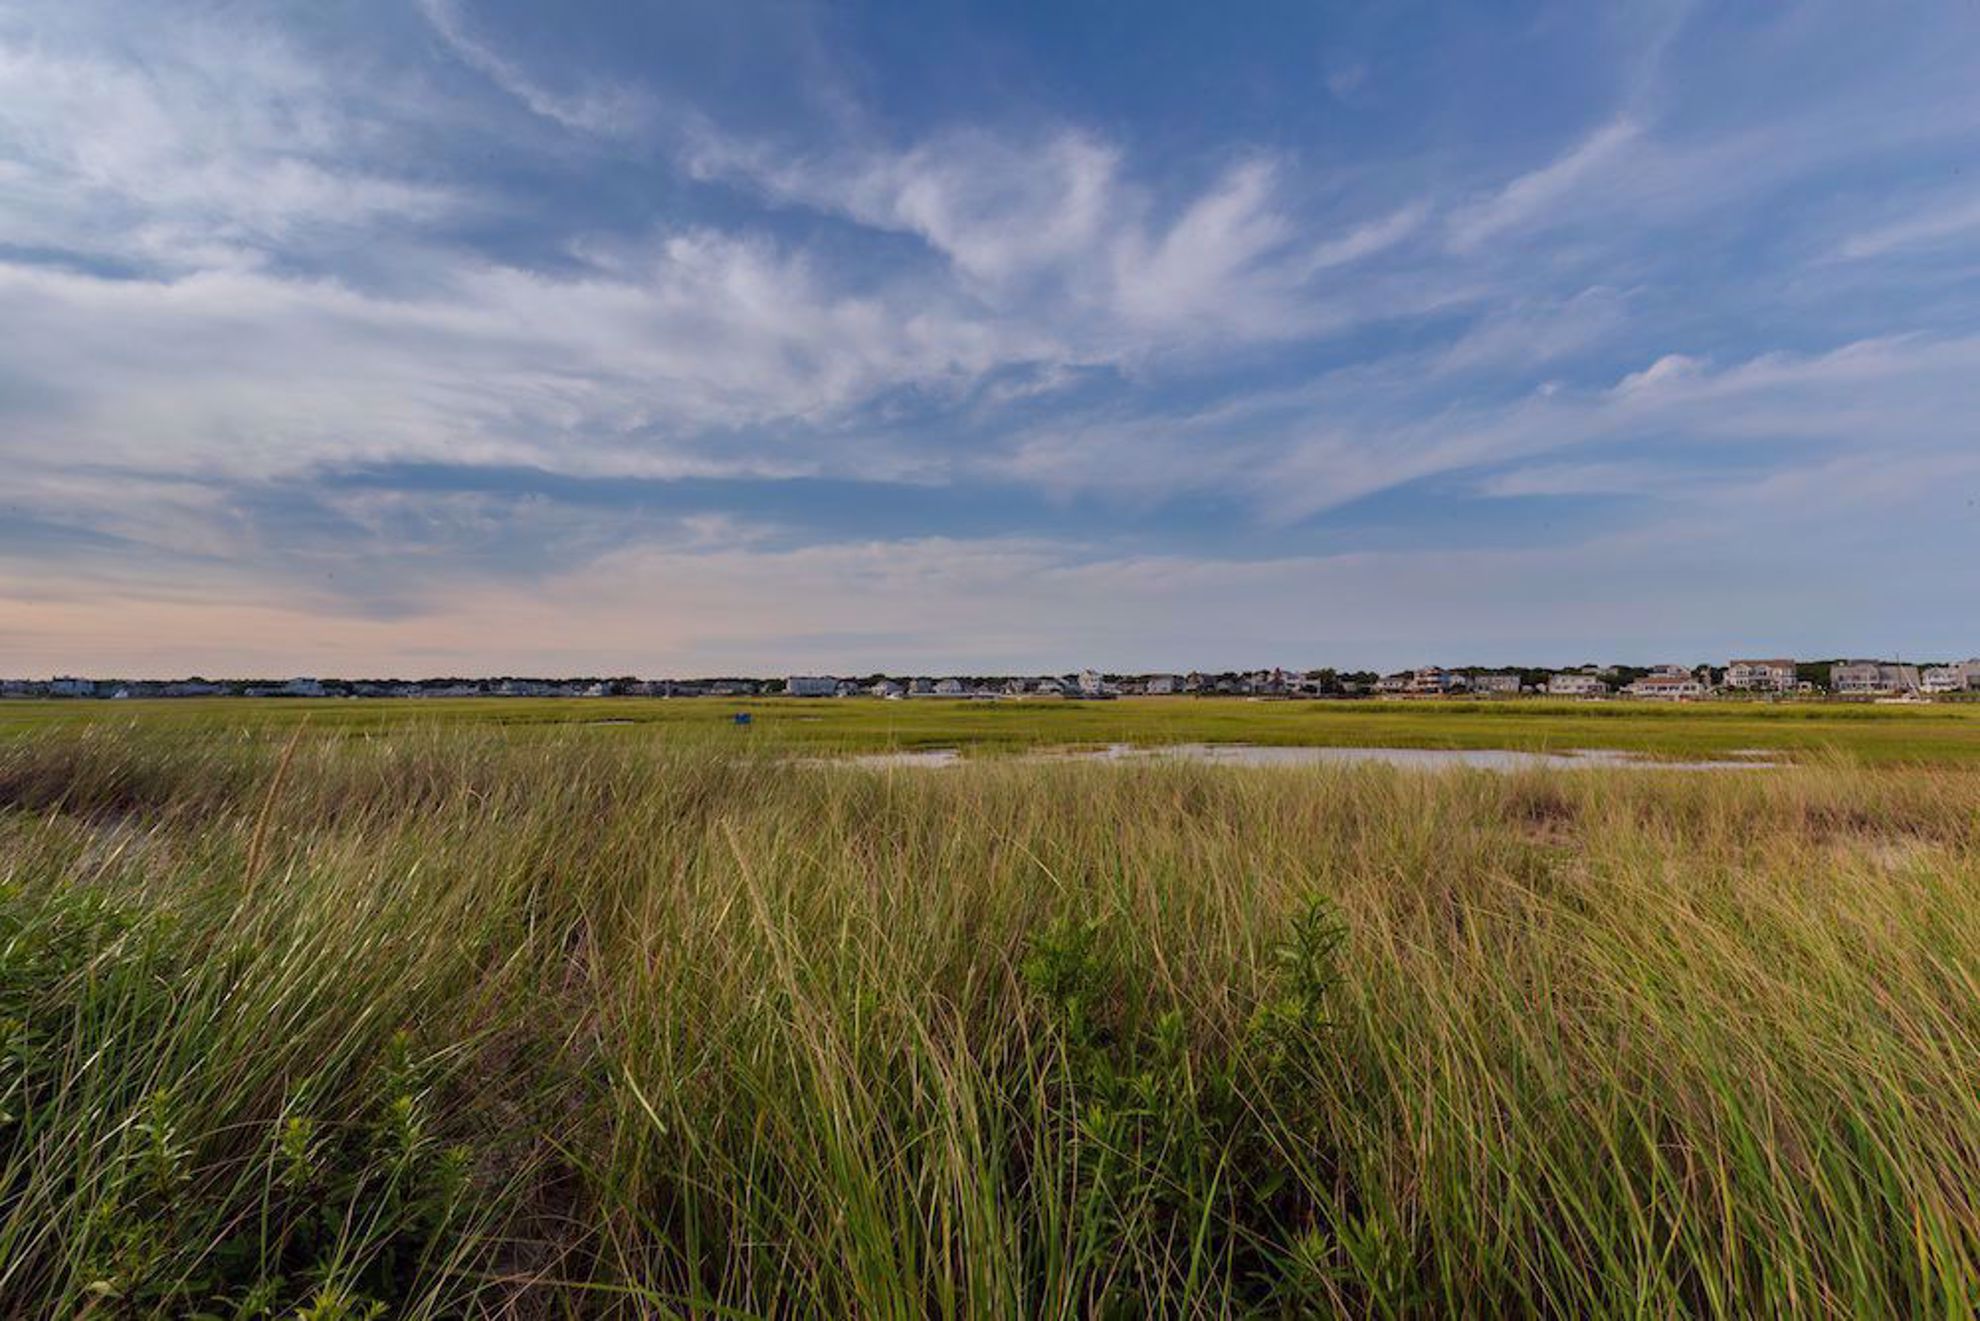 Chatham from across the grasses on Cape Cod